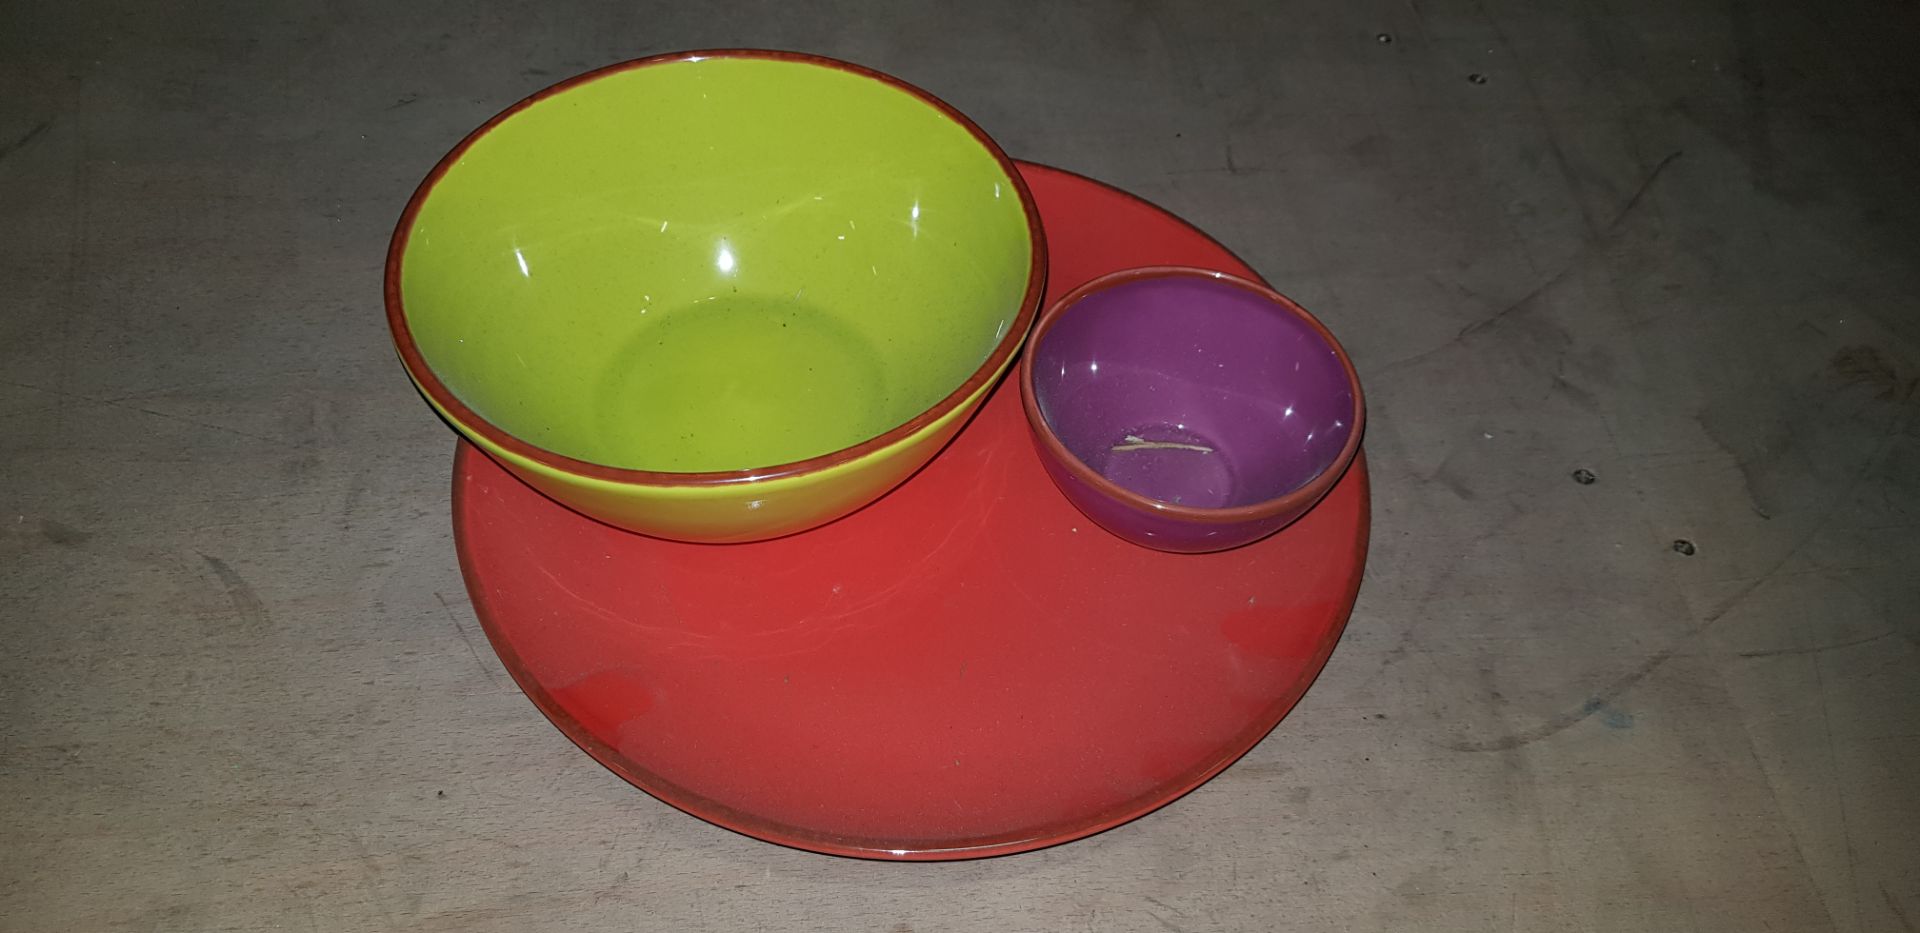 12 X SET OF 3 PLATES AND BOWLS IN RED GREEN RED AND PURPLE